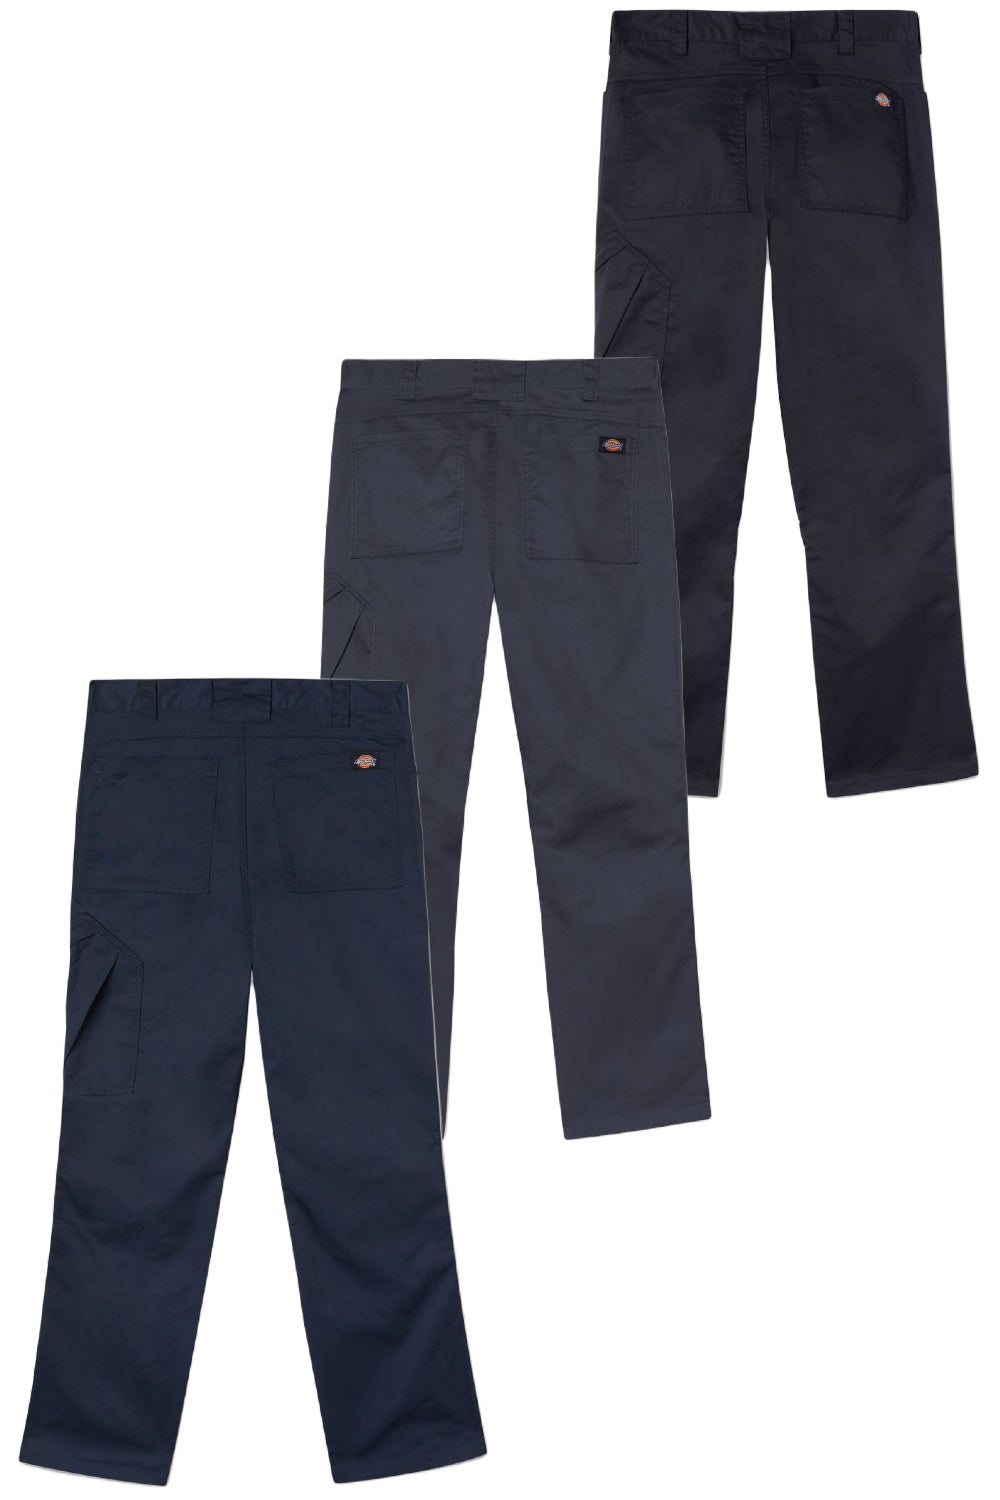 Dickies Action Flex Trousers in Navy Blue, Grey and Black